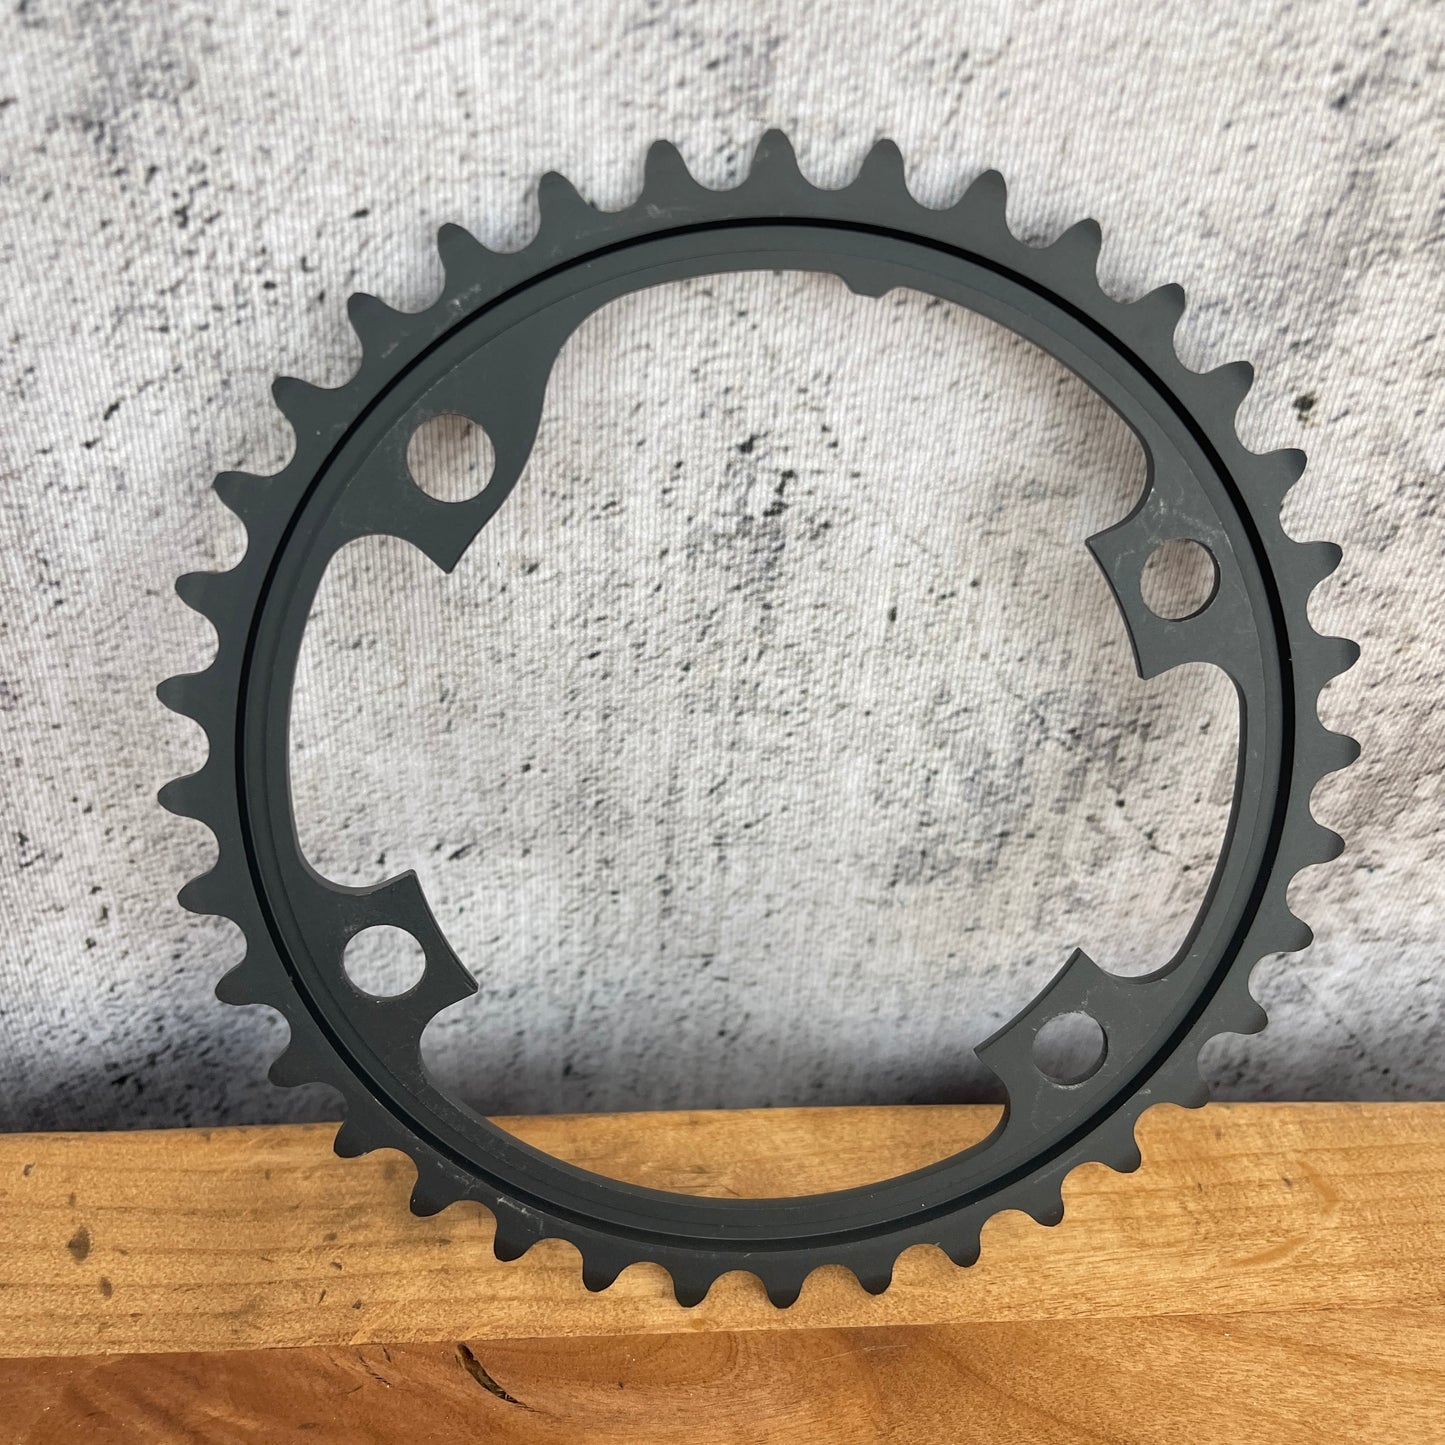 Shimano Ultegra R8000 52/36t 11-Speed 4-Bolt 110BCD Pair Chainrings 110BCD